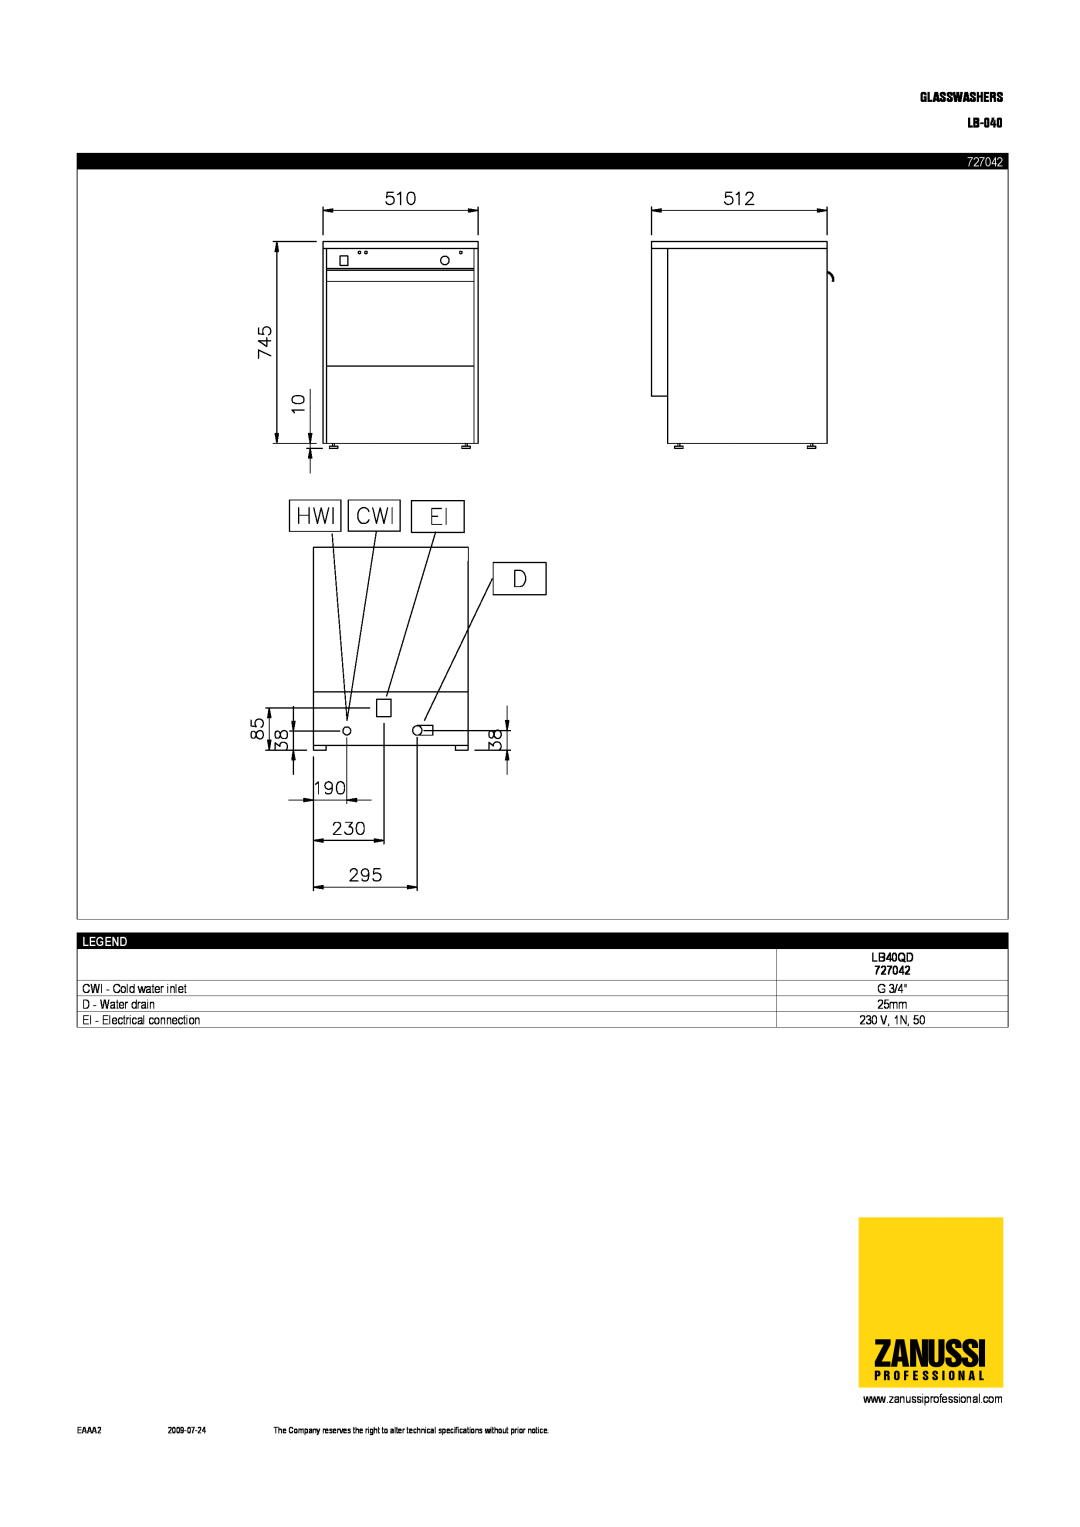 Zanussi LB-040 Zanussi, Legend, CWI - Cold water inlet D - Water drain, EI - Electrical connection, 727042, LB40QD, EAAA2 